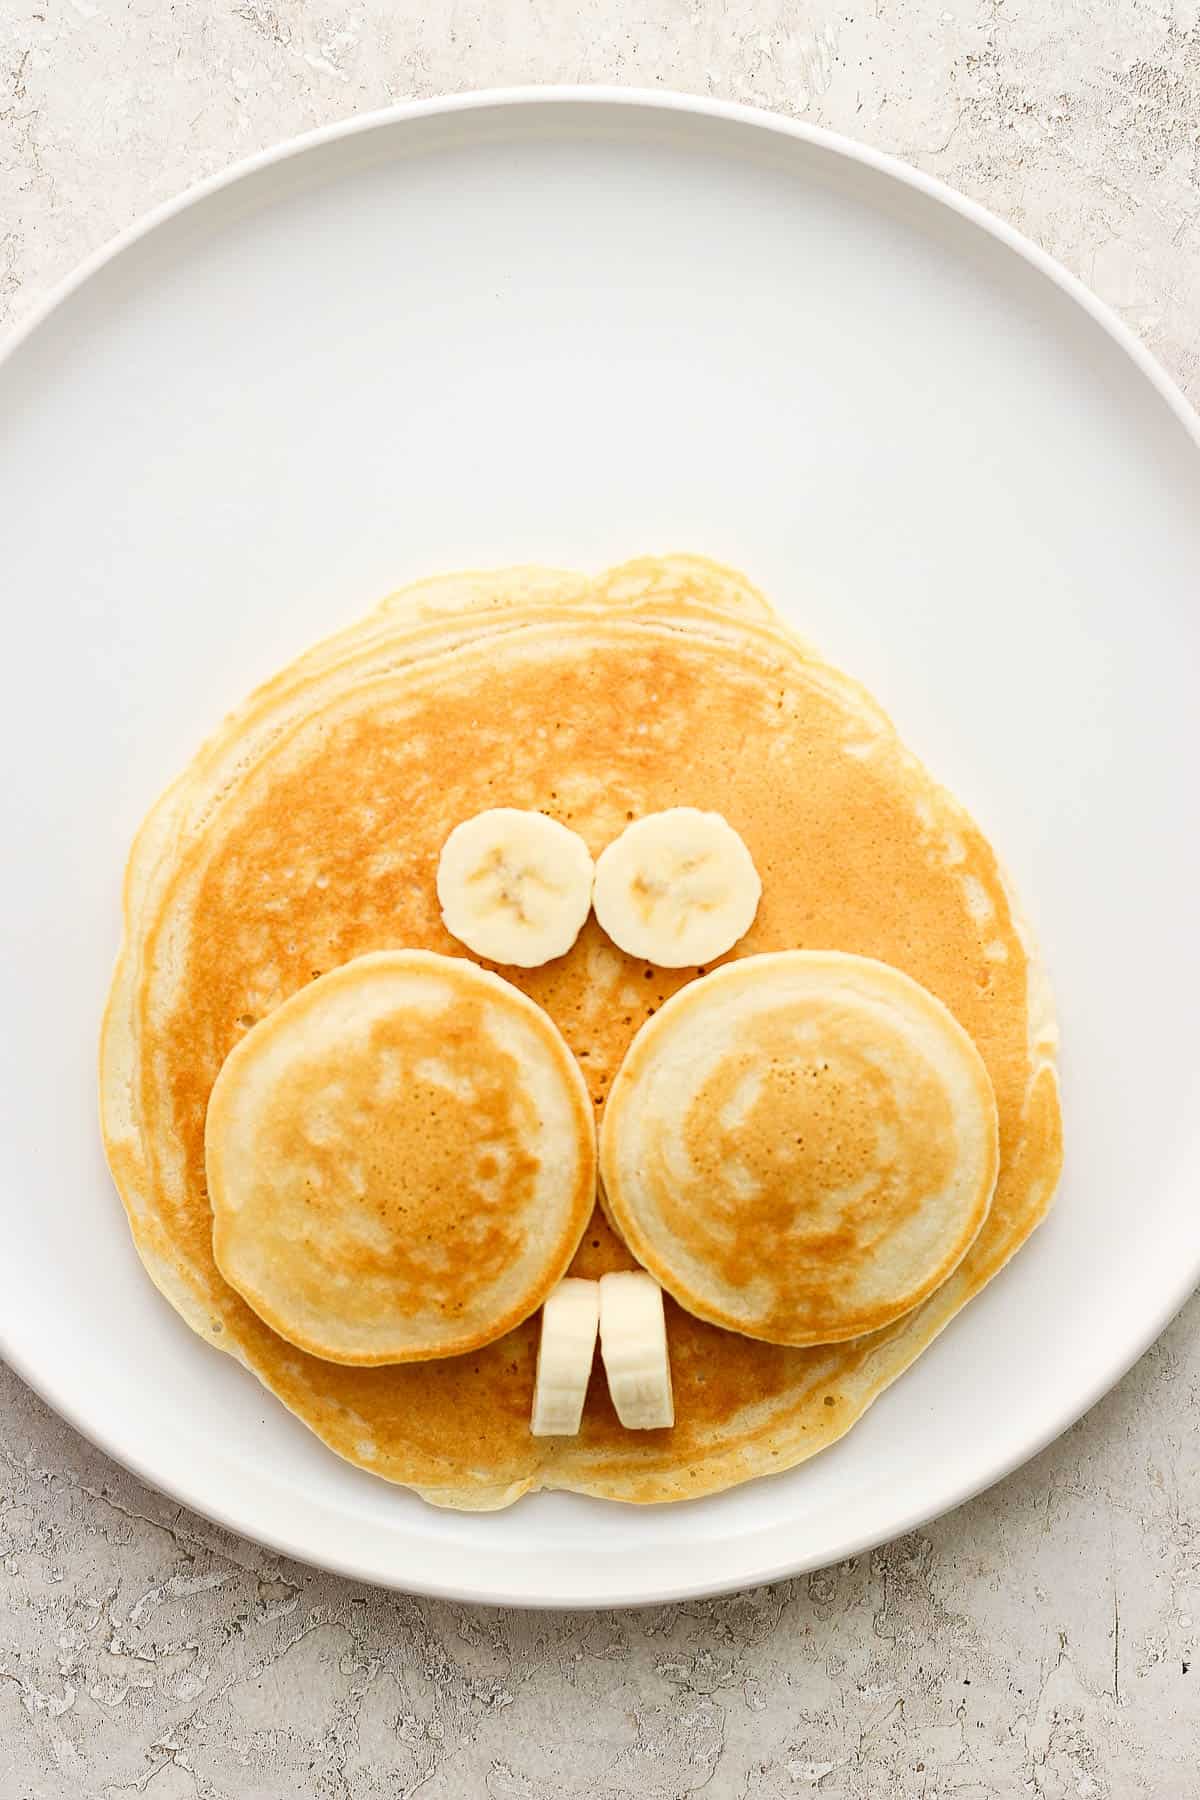 One large pancake with two small pancakes as cheeks and banana slices as eyes and teeth.